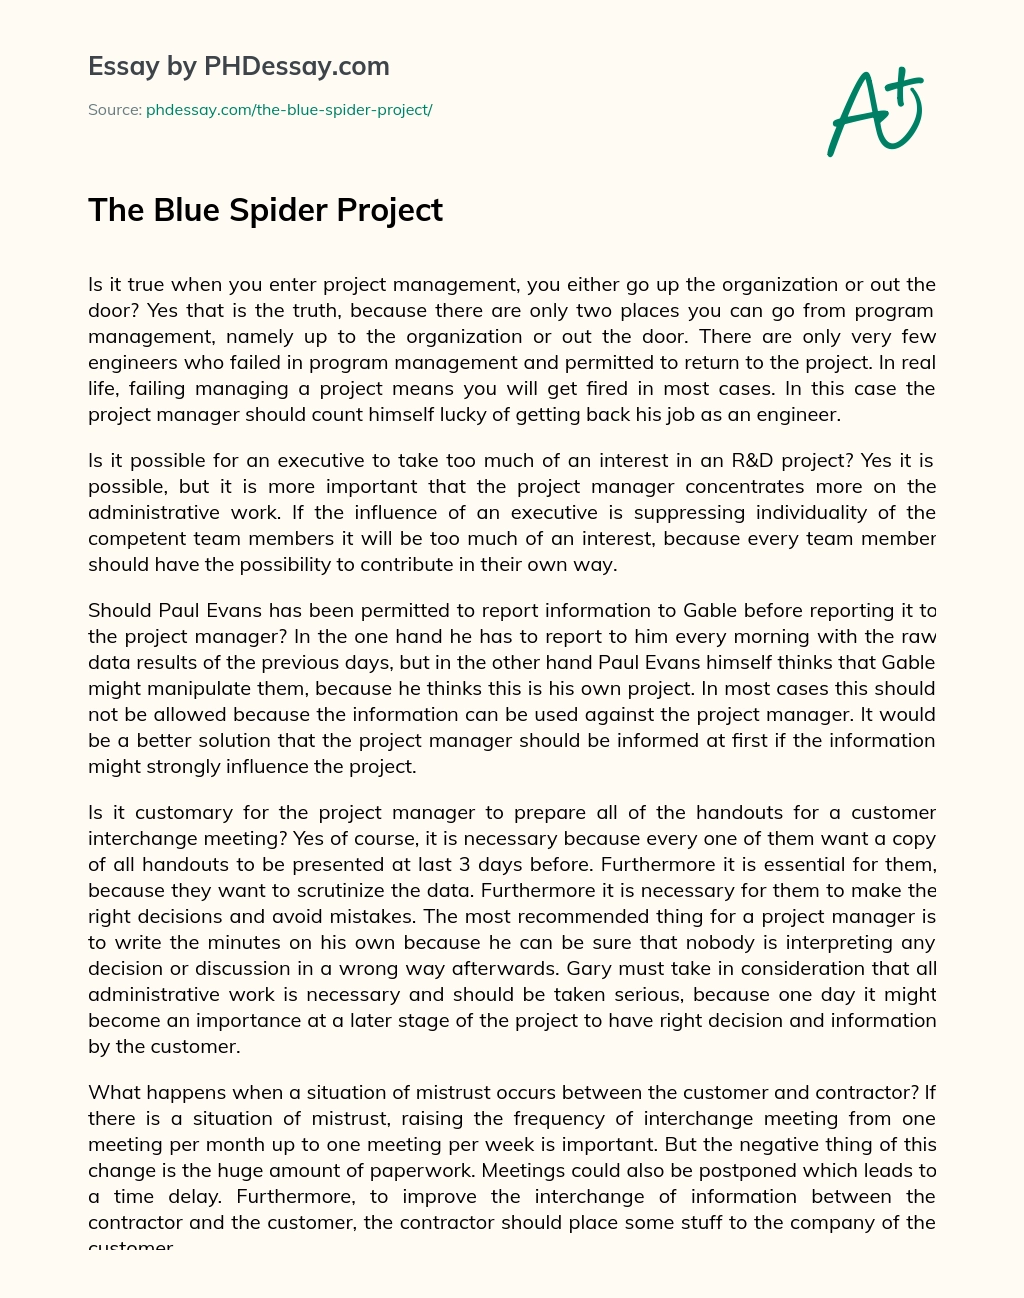 The Blue Spider Project essay